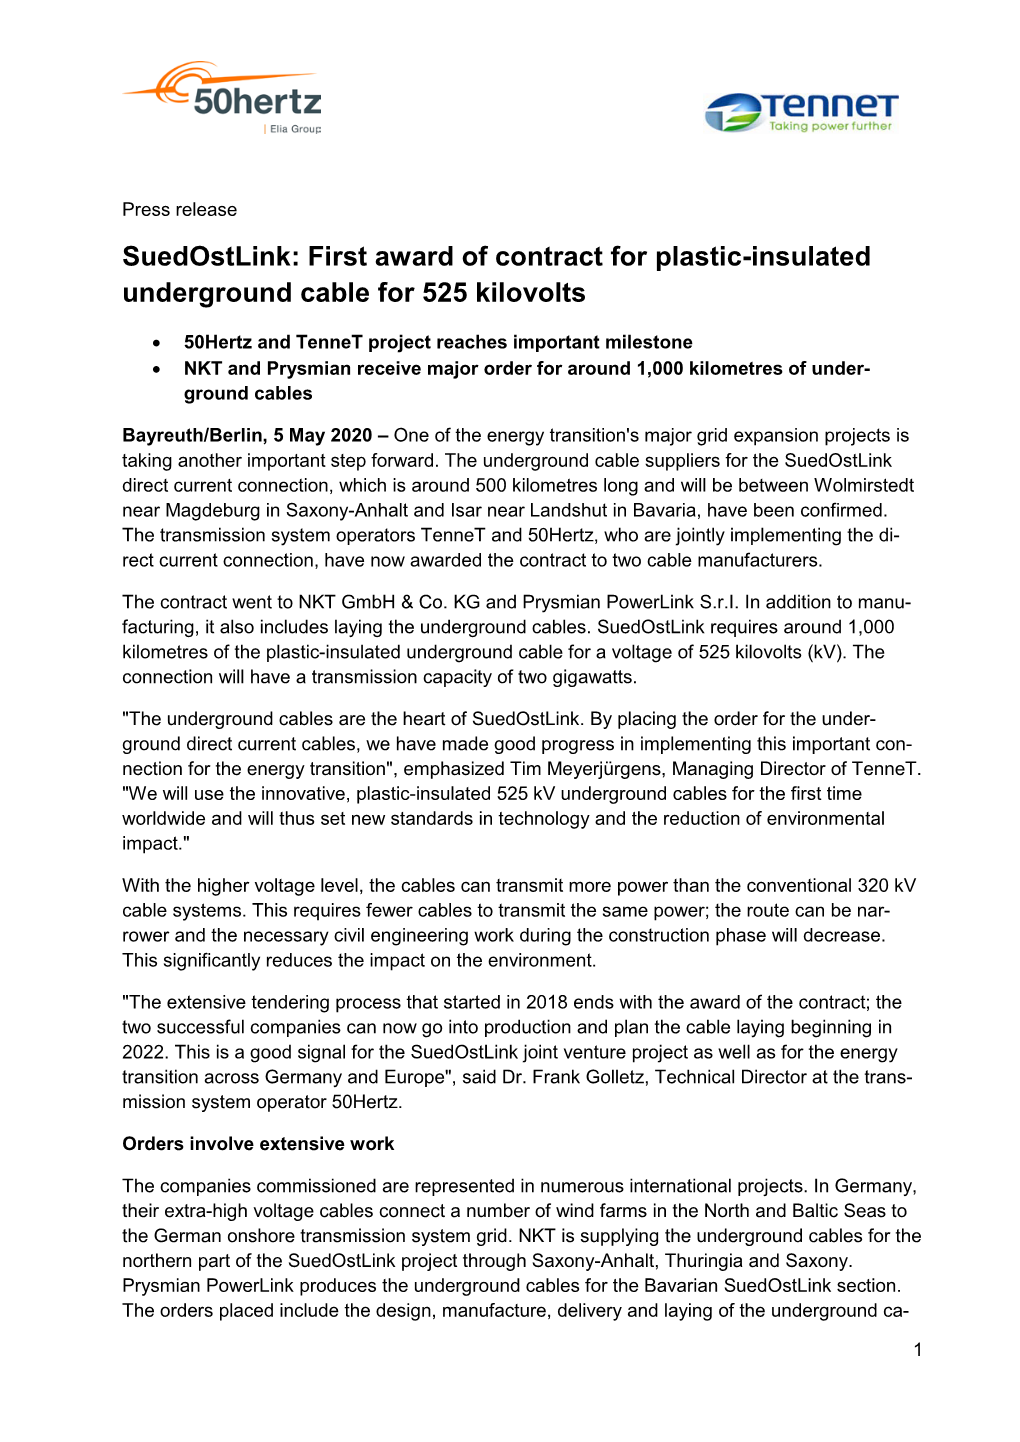 Suedostlink: First Award of Contract for Plastic-Insulated Underground Cable for 525 Kilovolts